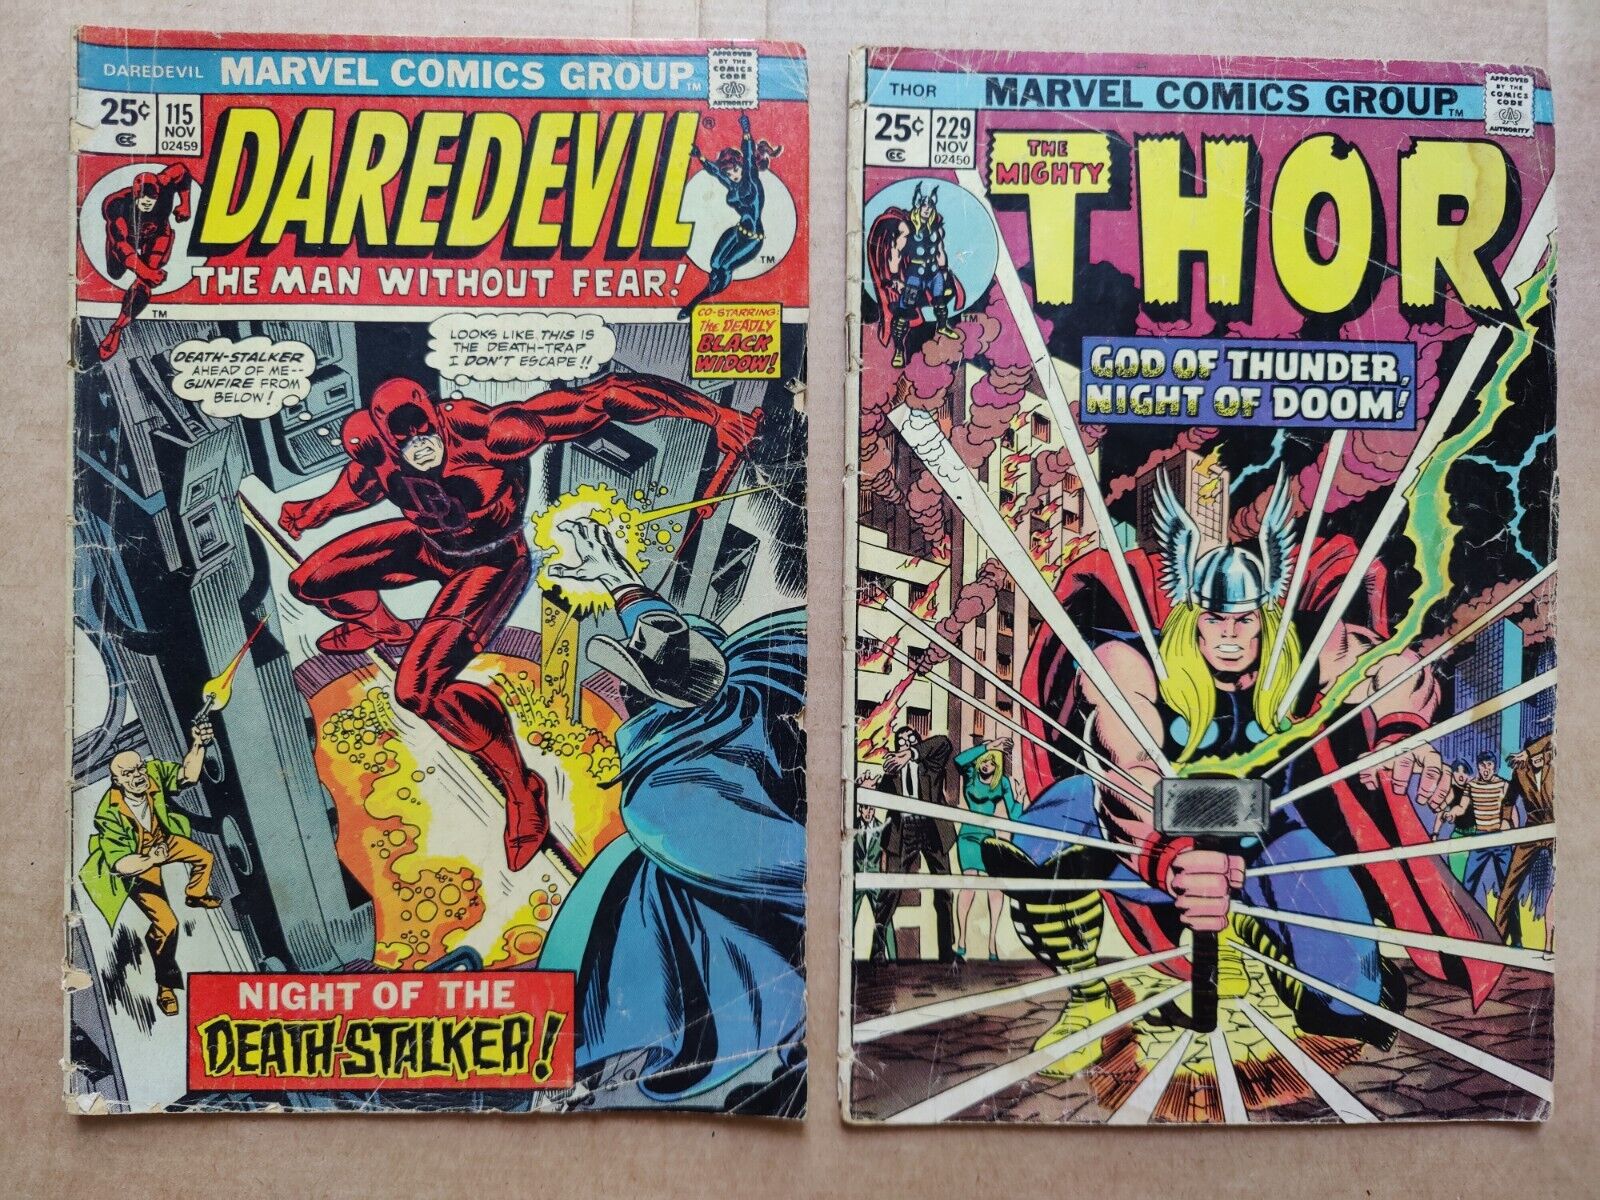 VERY LOW GRADE Daredevil 115 Thor 229 Early Appearance Wolverine Ad Lot Of 2 